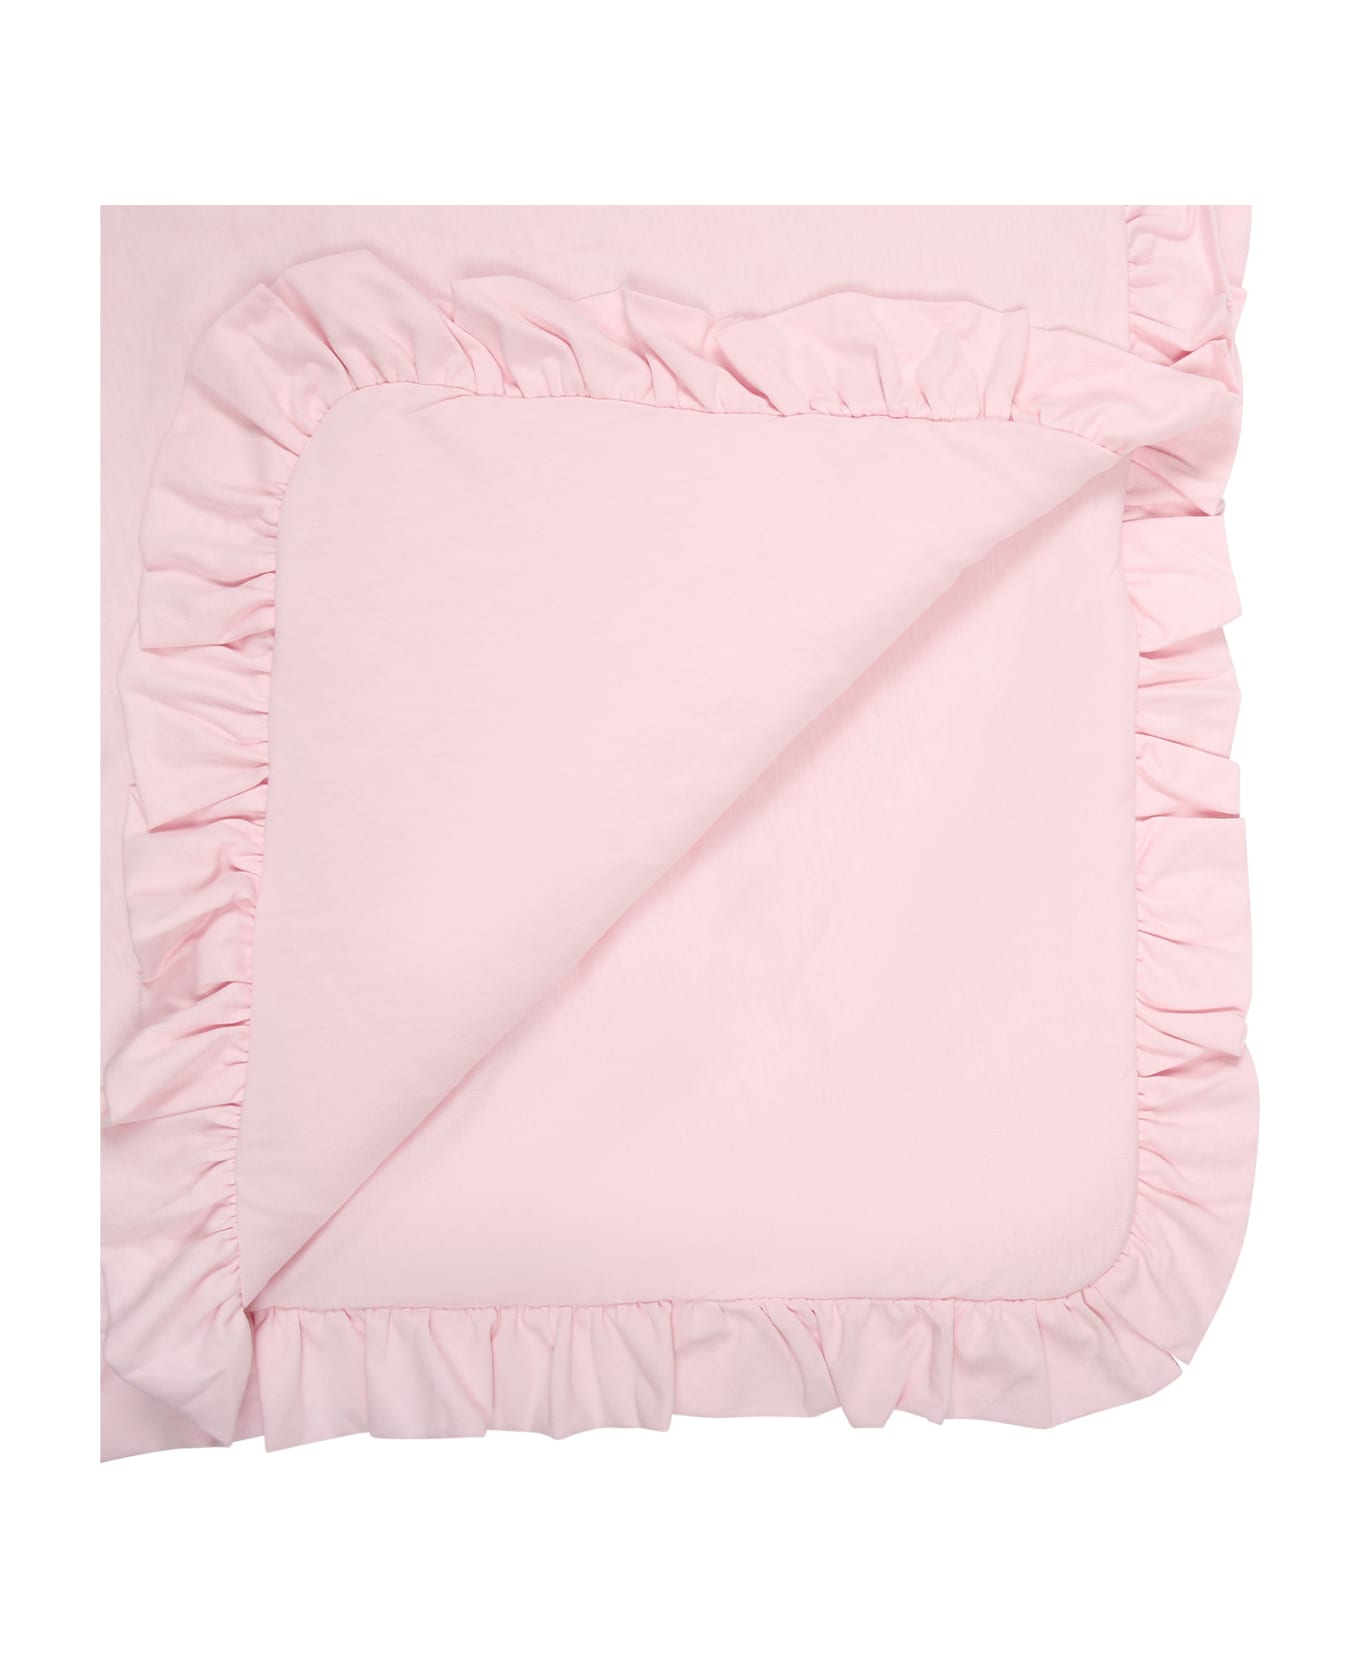 Balmain Pink Blanket For Baby Girl With Logo - Pink